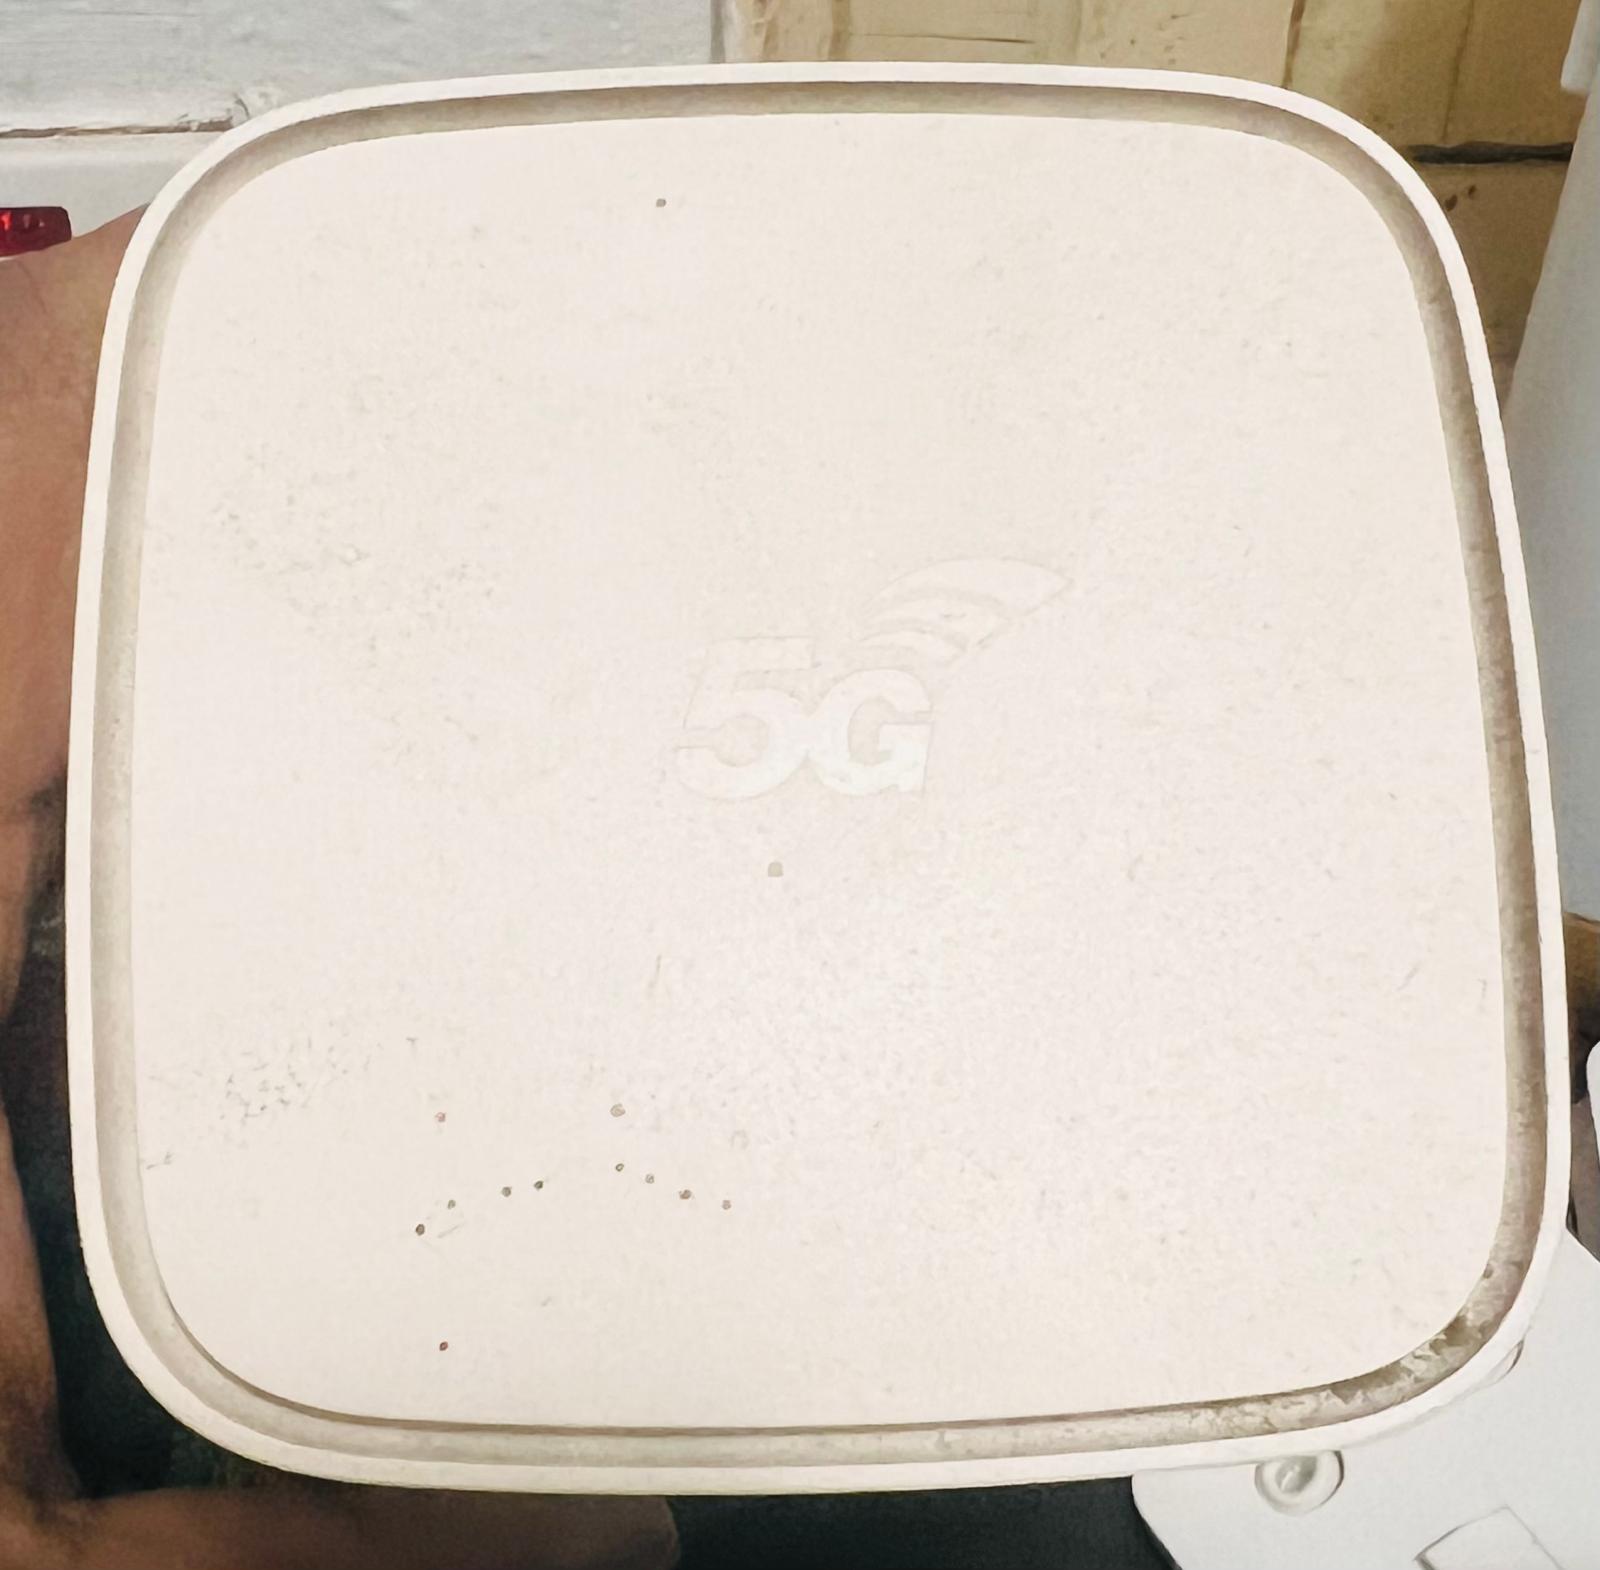 HUAWEI 5G CPE Pro 2 router for sale